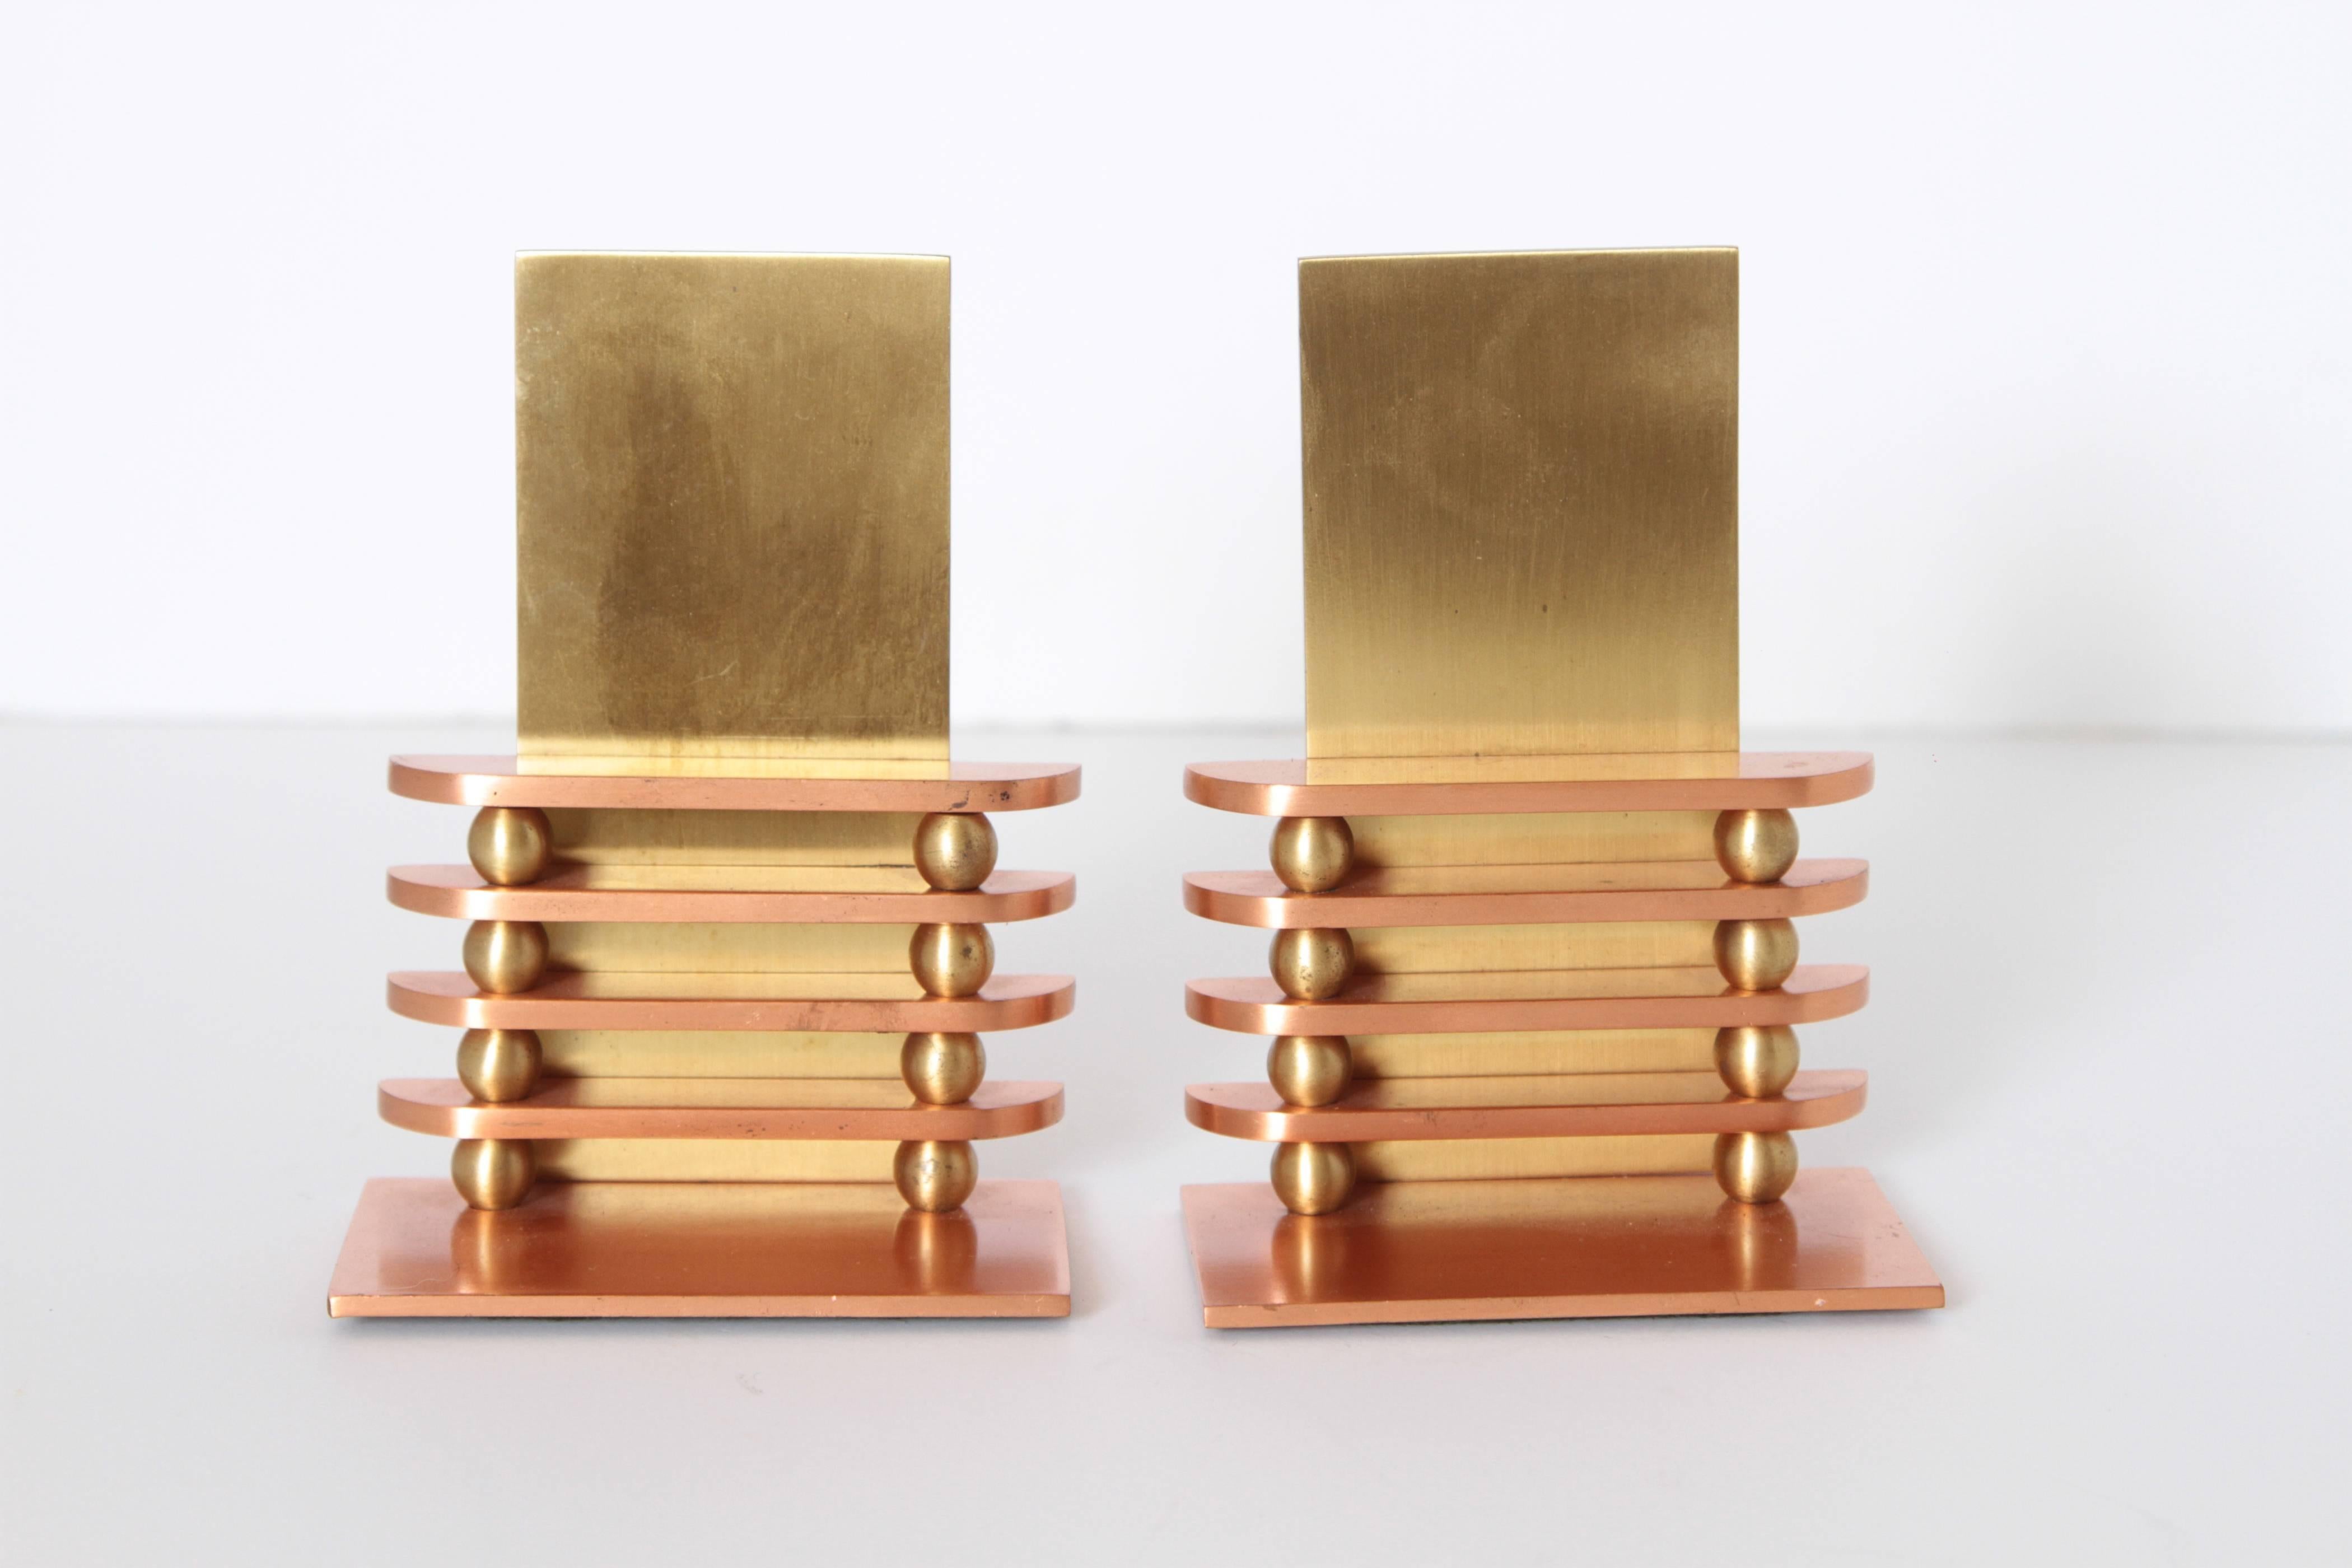 Machine Age Art Deco Walter Von Nessen octaball bookends for Chase, pair

A rare early limited-production Nessen design for Chase, produced only in 1933.
Appealing polished copper / polished brass finish. 
Catalog # 17041.
Much more difficult to